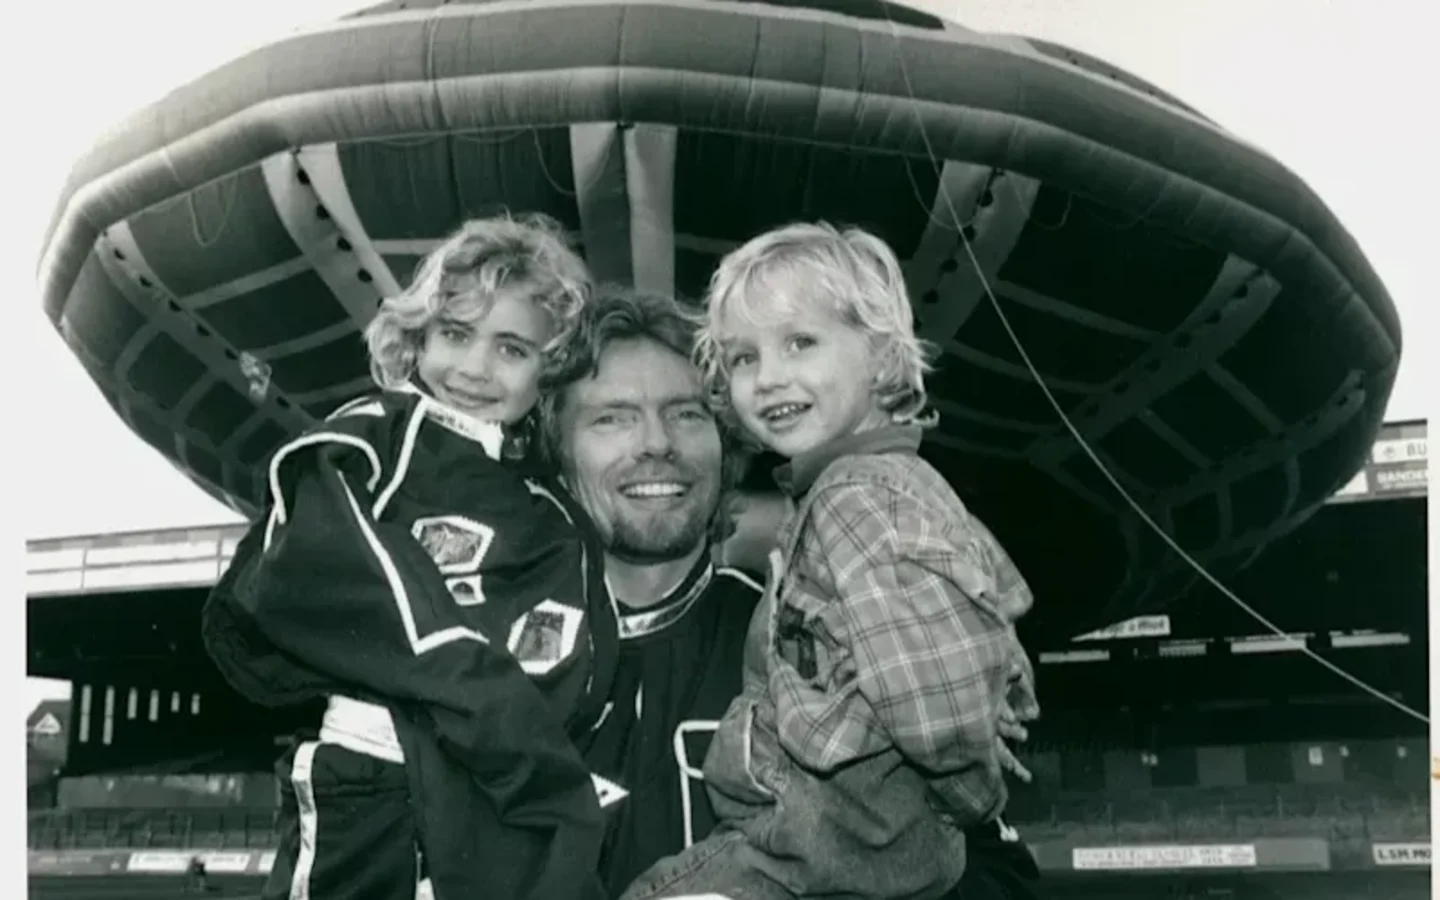 Richard Branson with Sam and Holly as children in front of a UFO